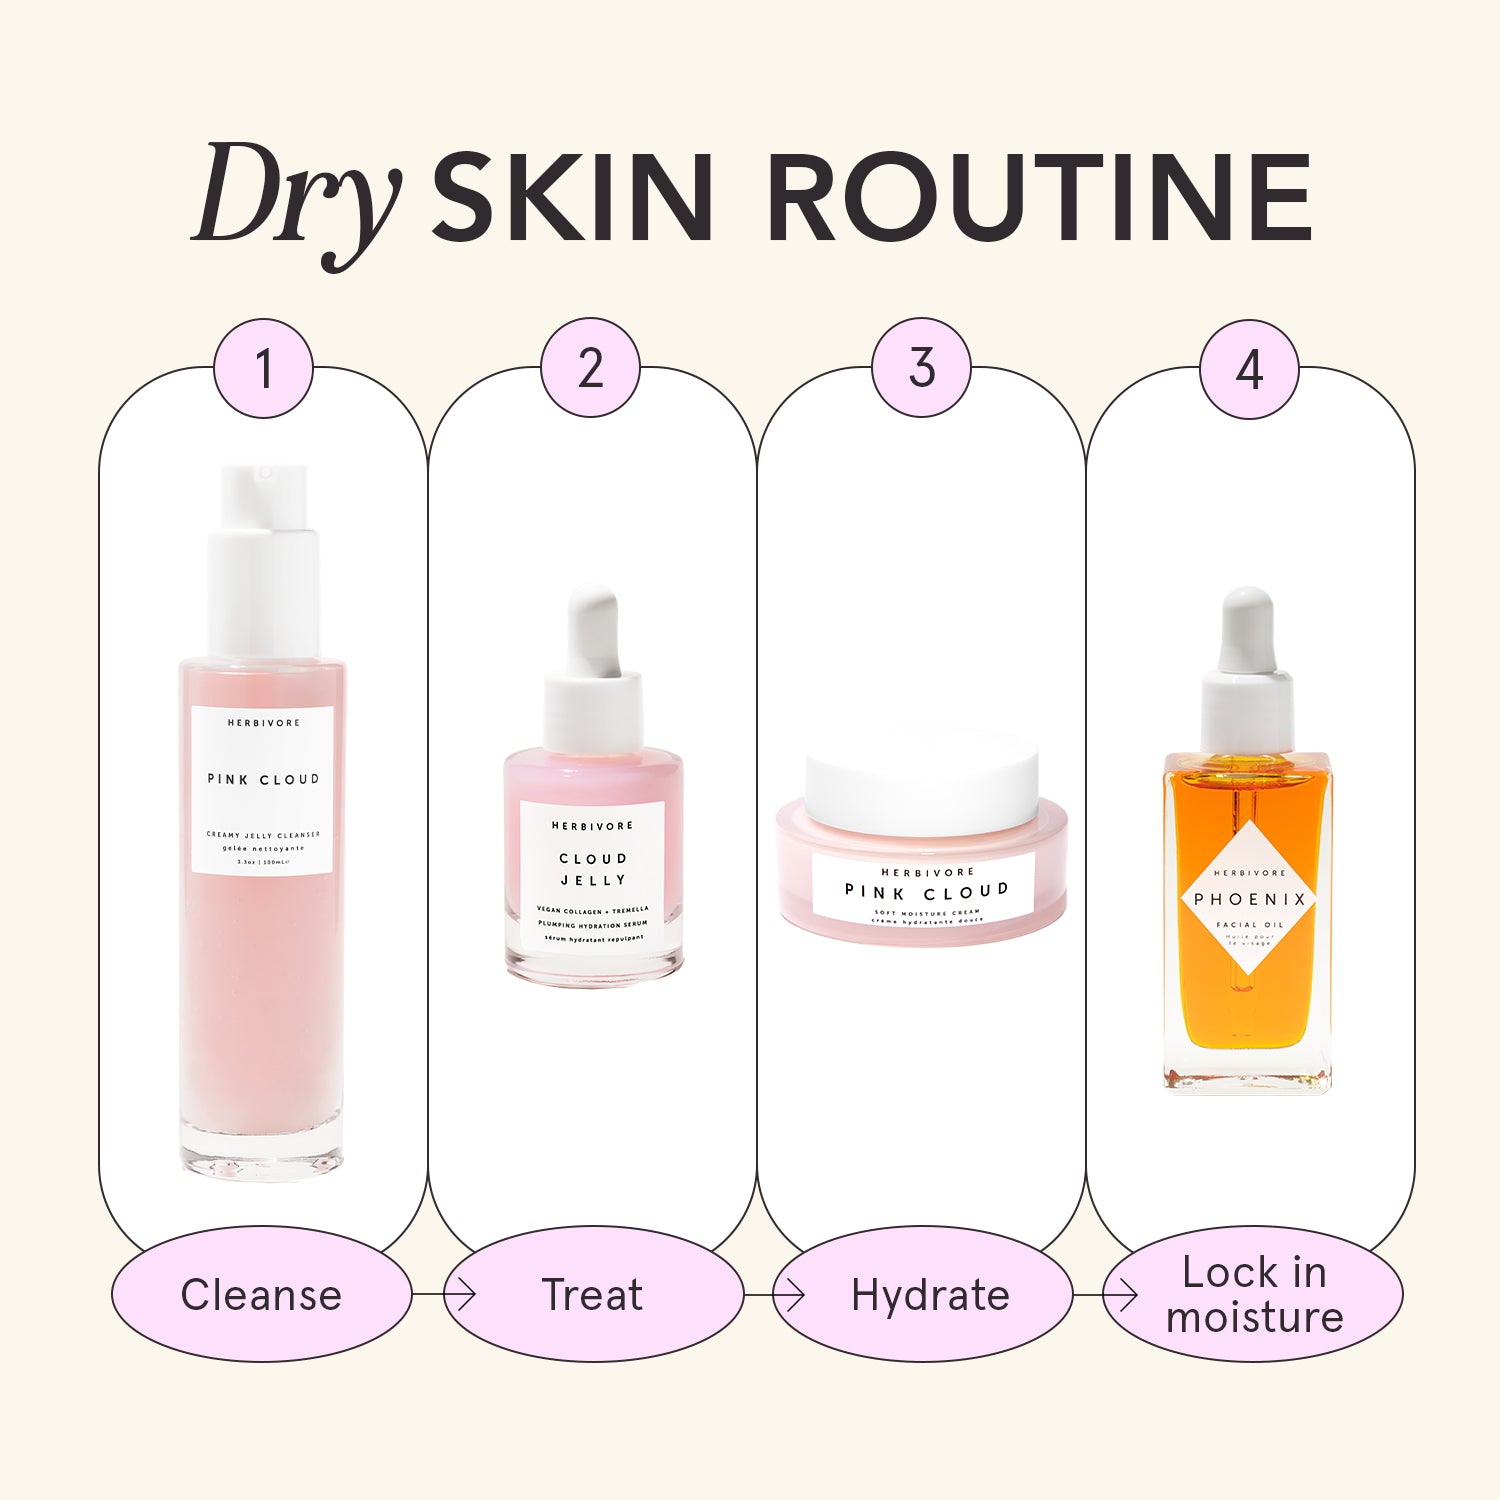 Infographic titled "Dry Skin Routine" numbered one through four. 1) Cleanse with Pink Cloud Cleanser 2) Treat with Cloud Jelly Serum 3) Hydrate with Pink Cloud Cream and 4) Lock in moisture with Phoenix Face Oil